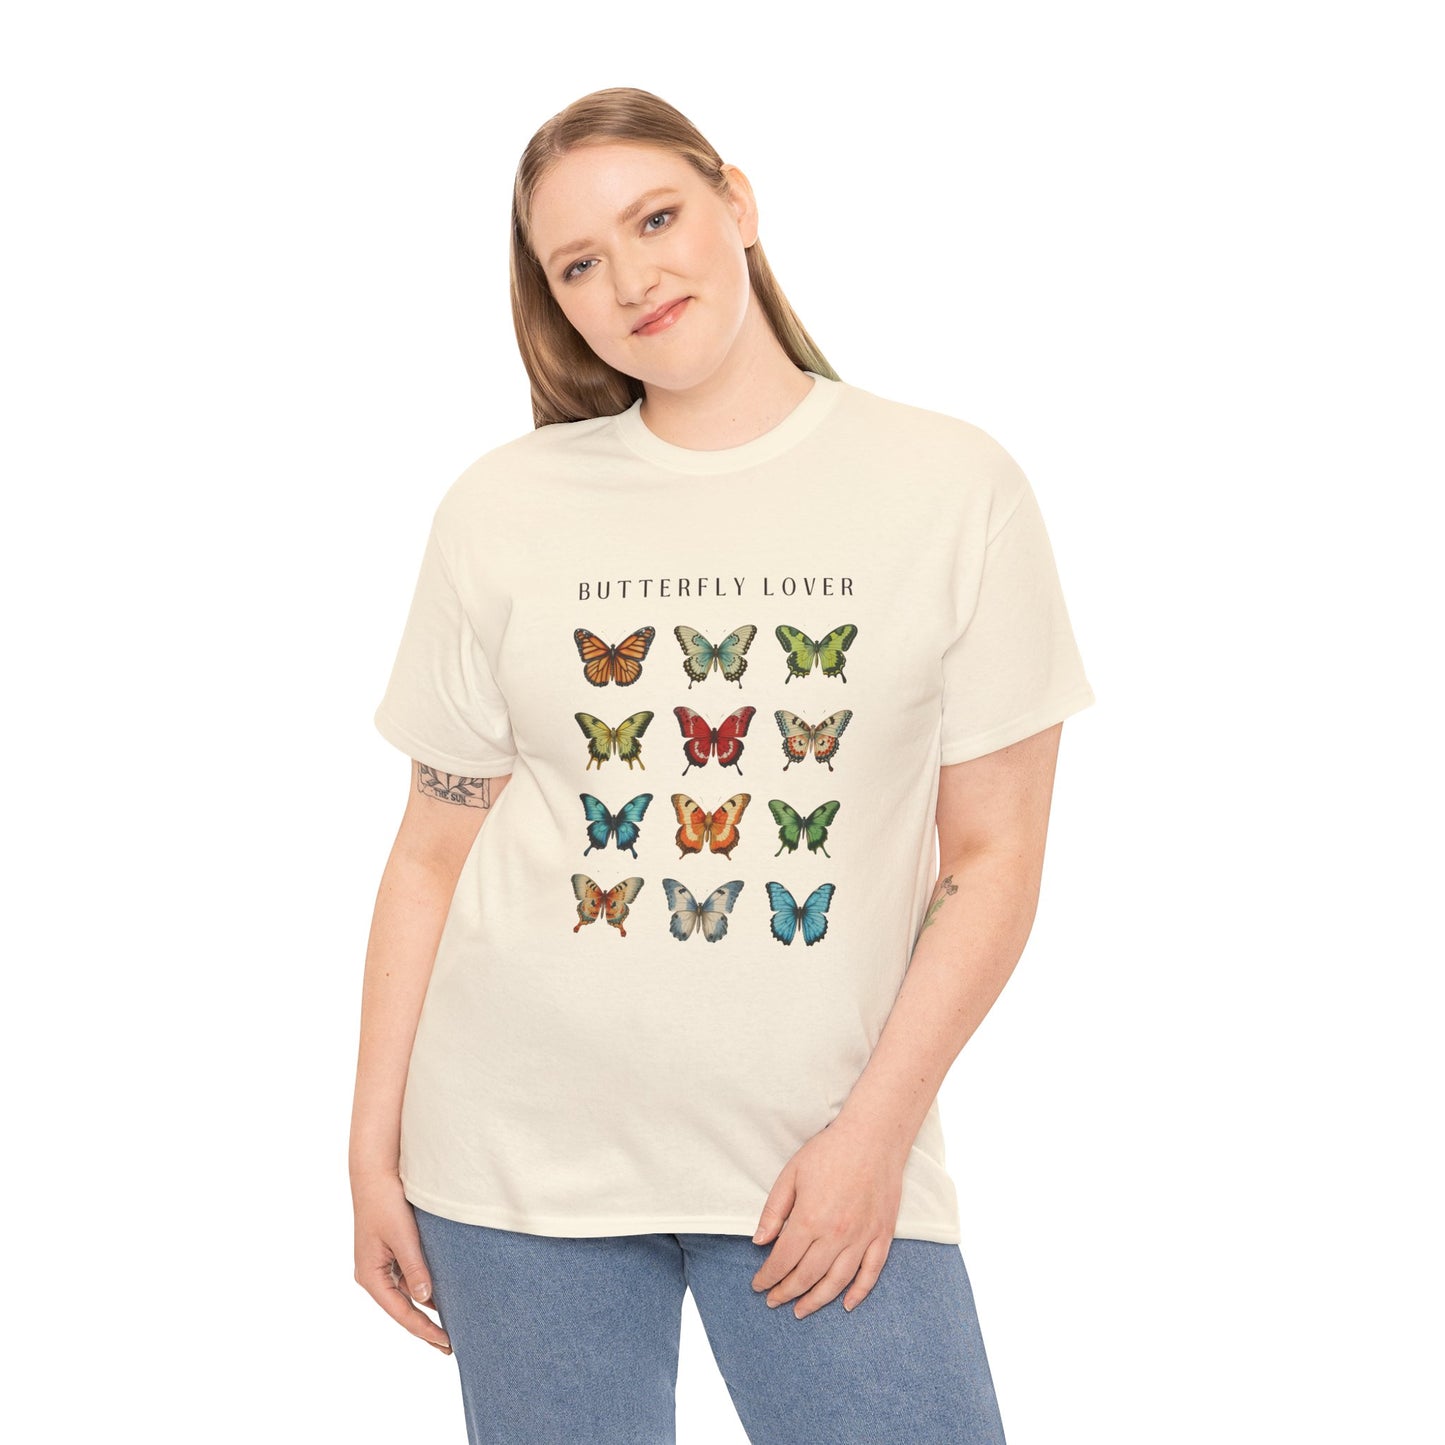 Unisex Heavy Cotton Graphic design (Butterfly Lover) T-shirt